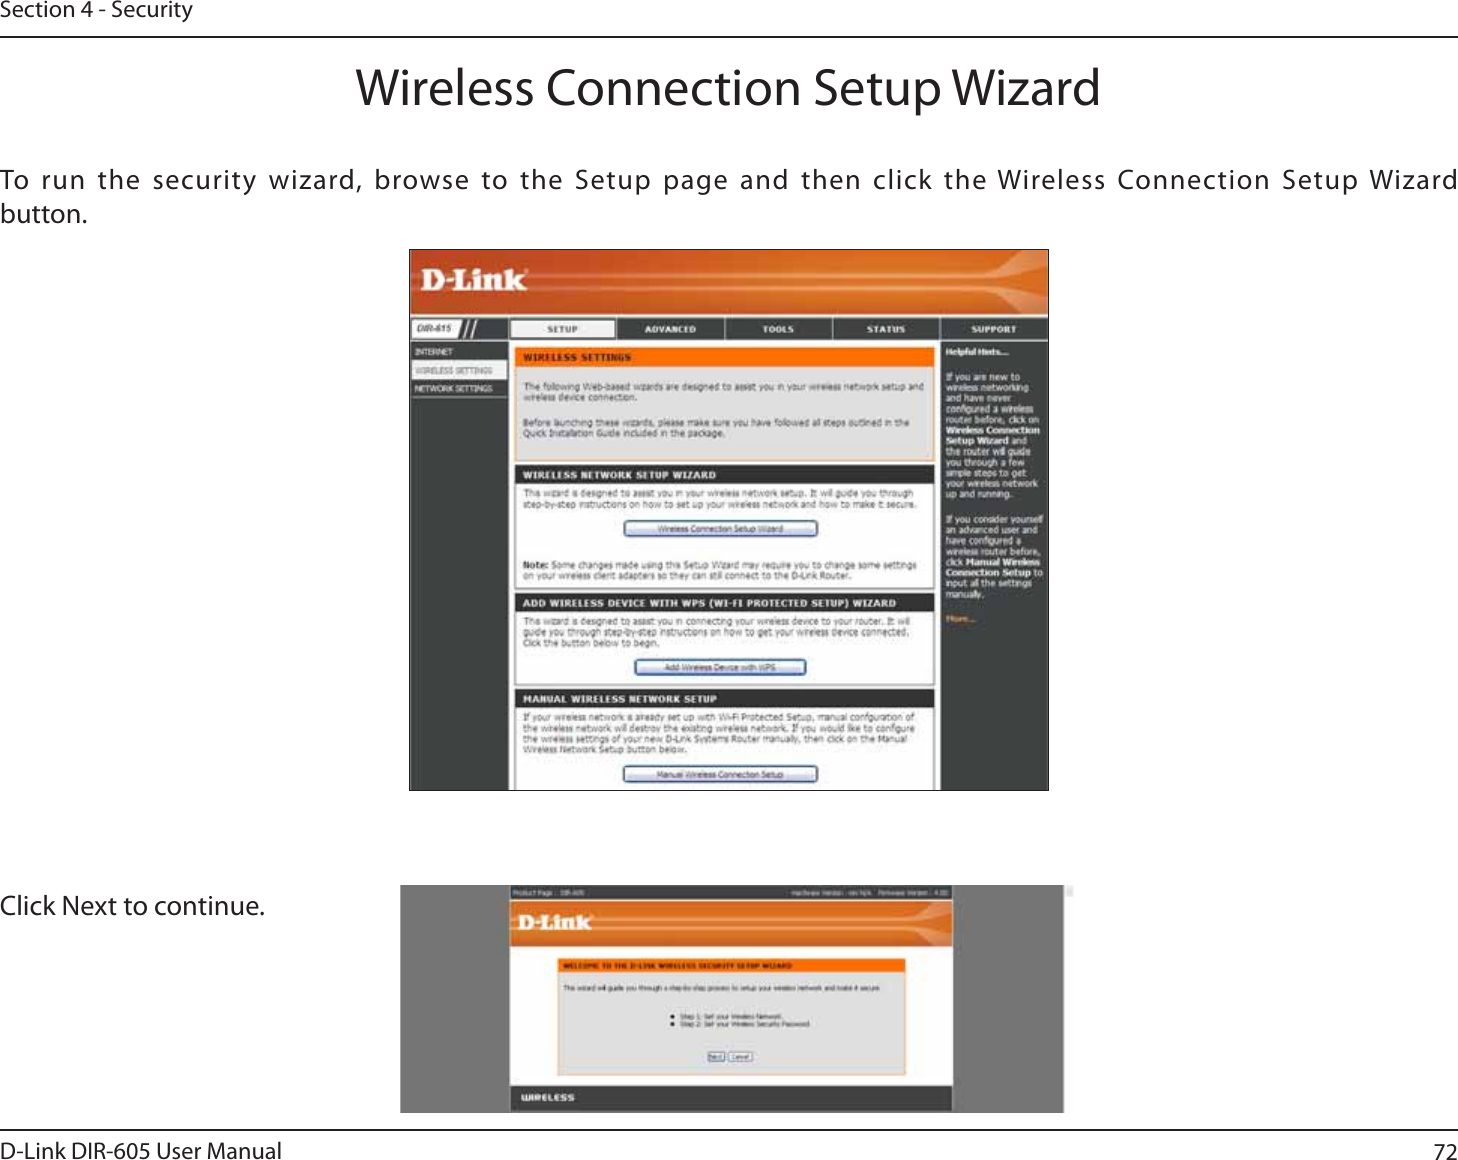 72D-Link DIR-605 User ManualSection 4 - SecurityWireless Connection Setup WizardTo run the security wizard, browse to the Setup page and then click the Wireless Connection Setup Wizard button. Click Next to continue.